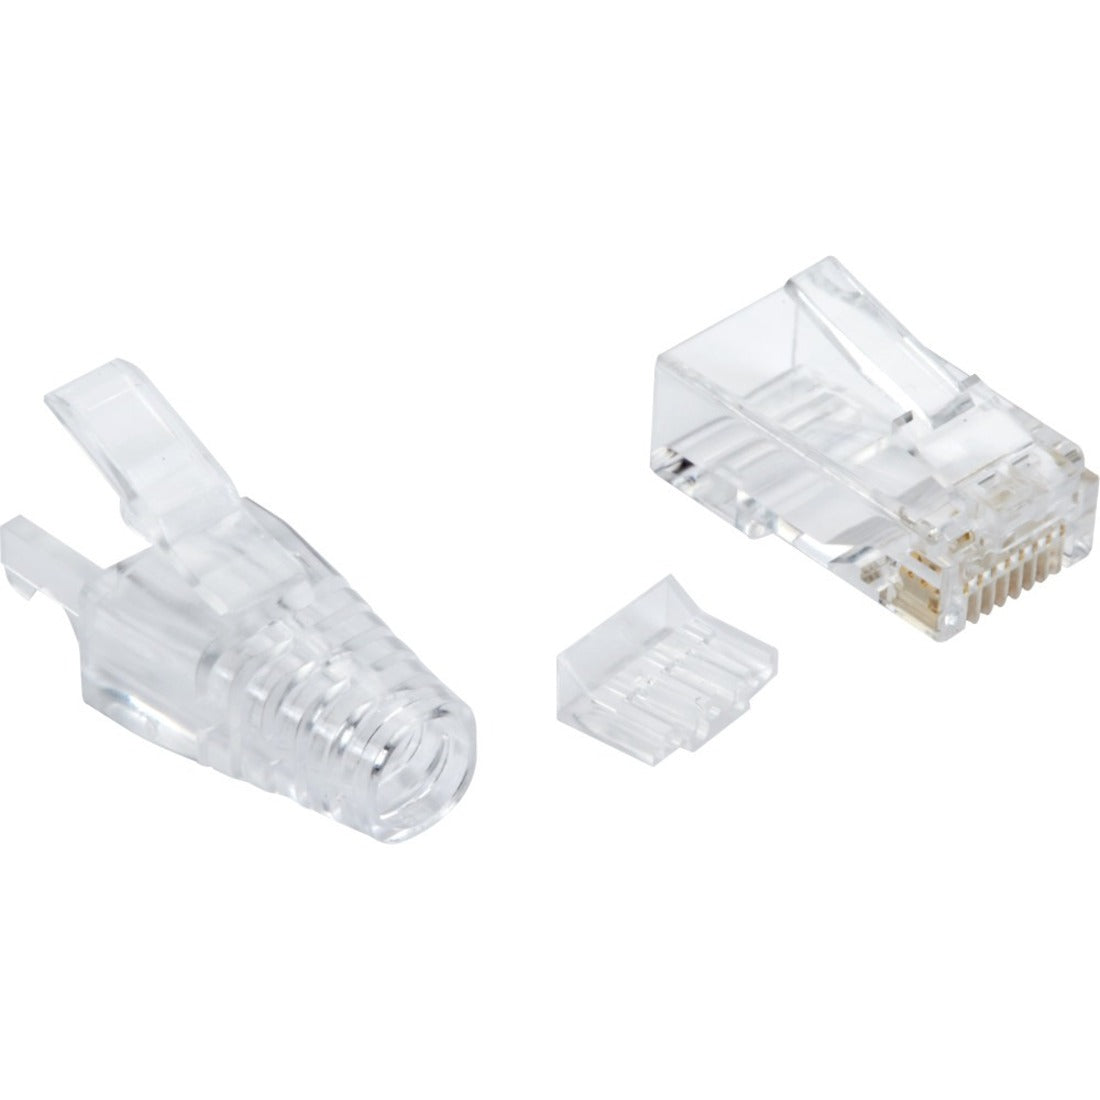 Black Box FMTP6A-CL-100PAK Network Connector, CAT6A RJ45 Plugs, Unshielded, Clear Snagless Strain Relief Boots, 100 Pack